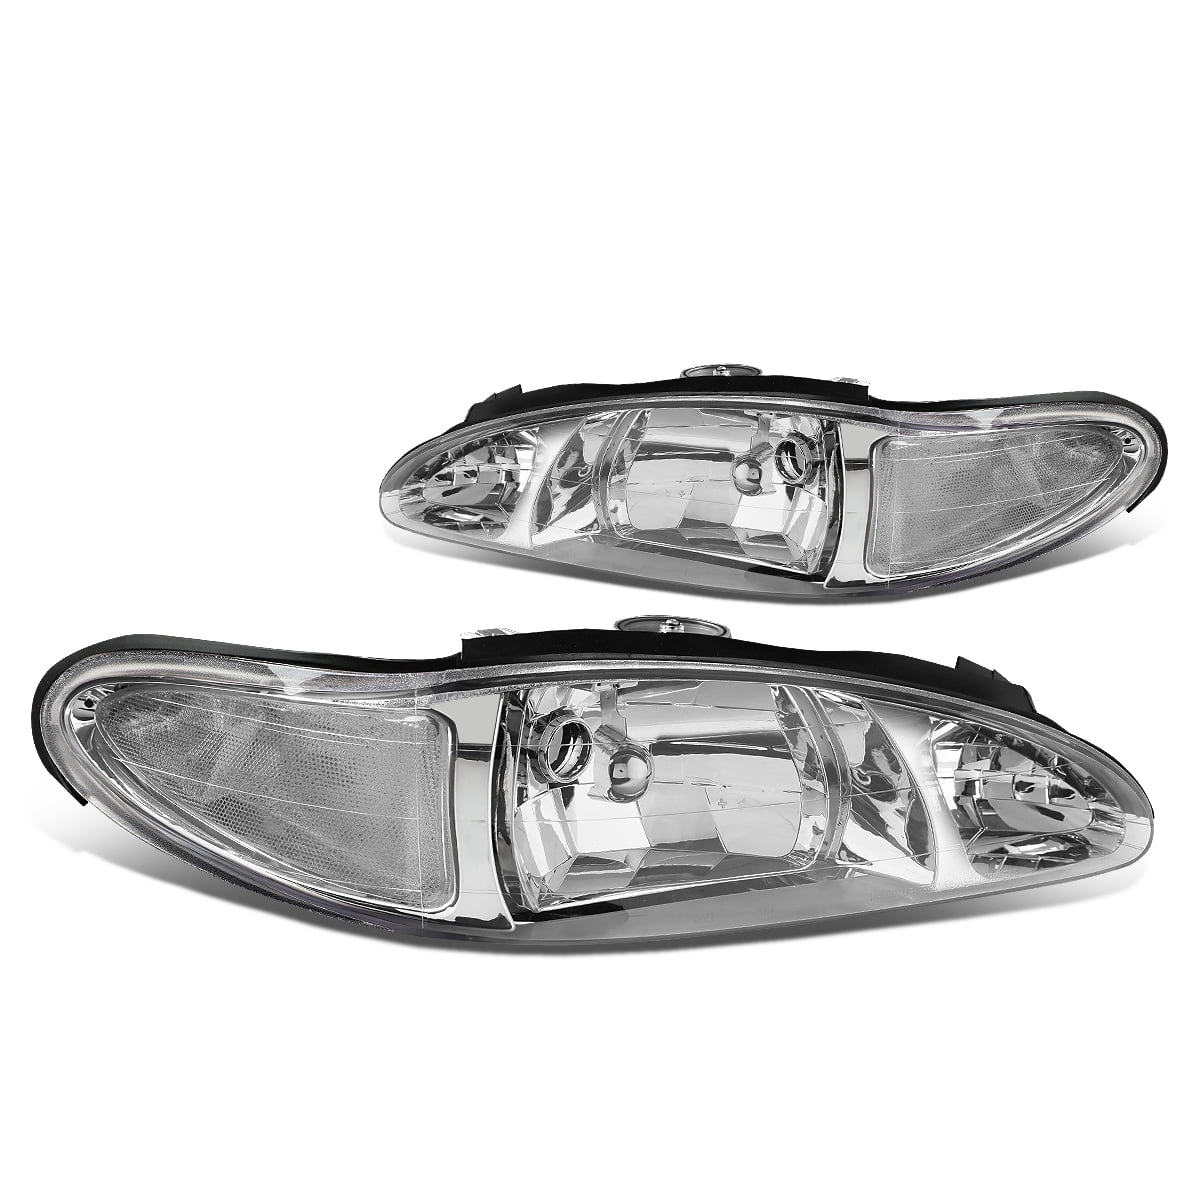 For 97-02 Ford Escort DNA Motoring HL-OH-020-CH-CL1 Pair of Headlight